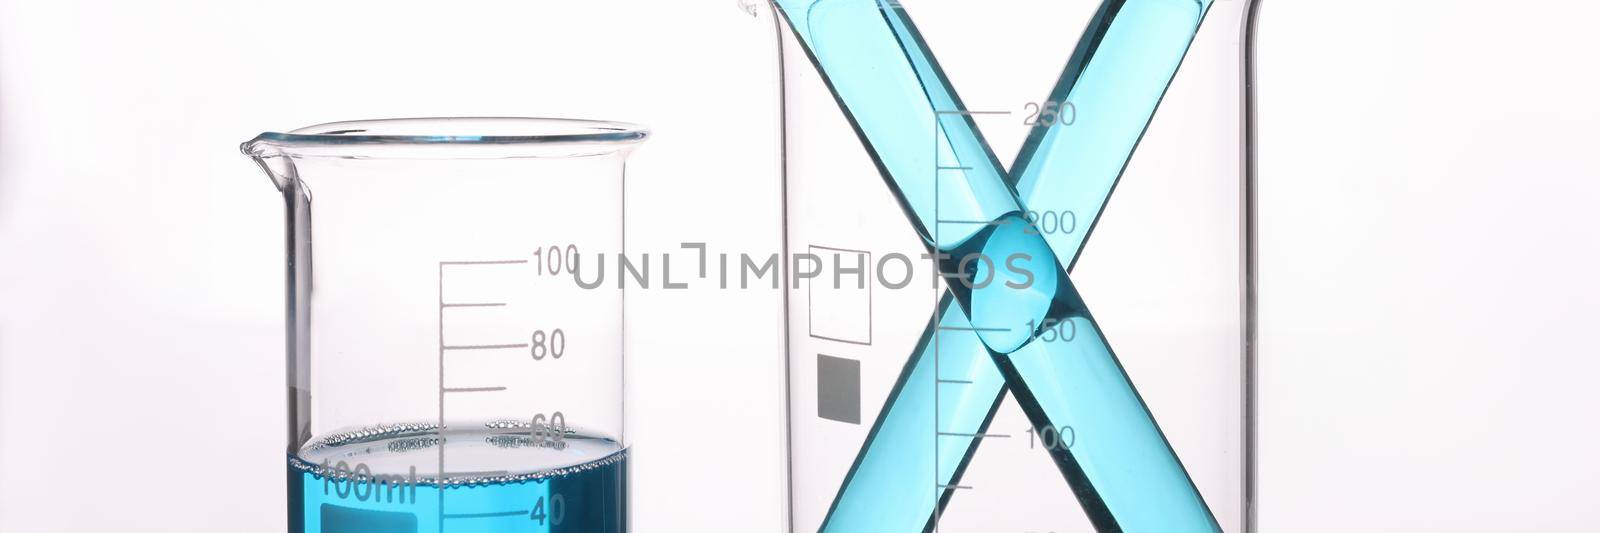 Blue liquid in measuring transparent vessels on a white background, close-up. Chemical experiments, pharmacology, microbiology experiment